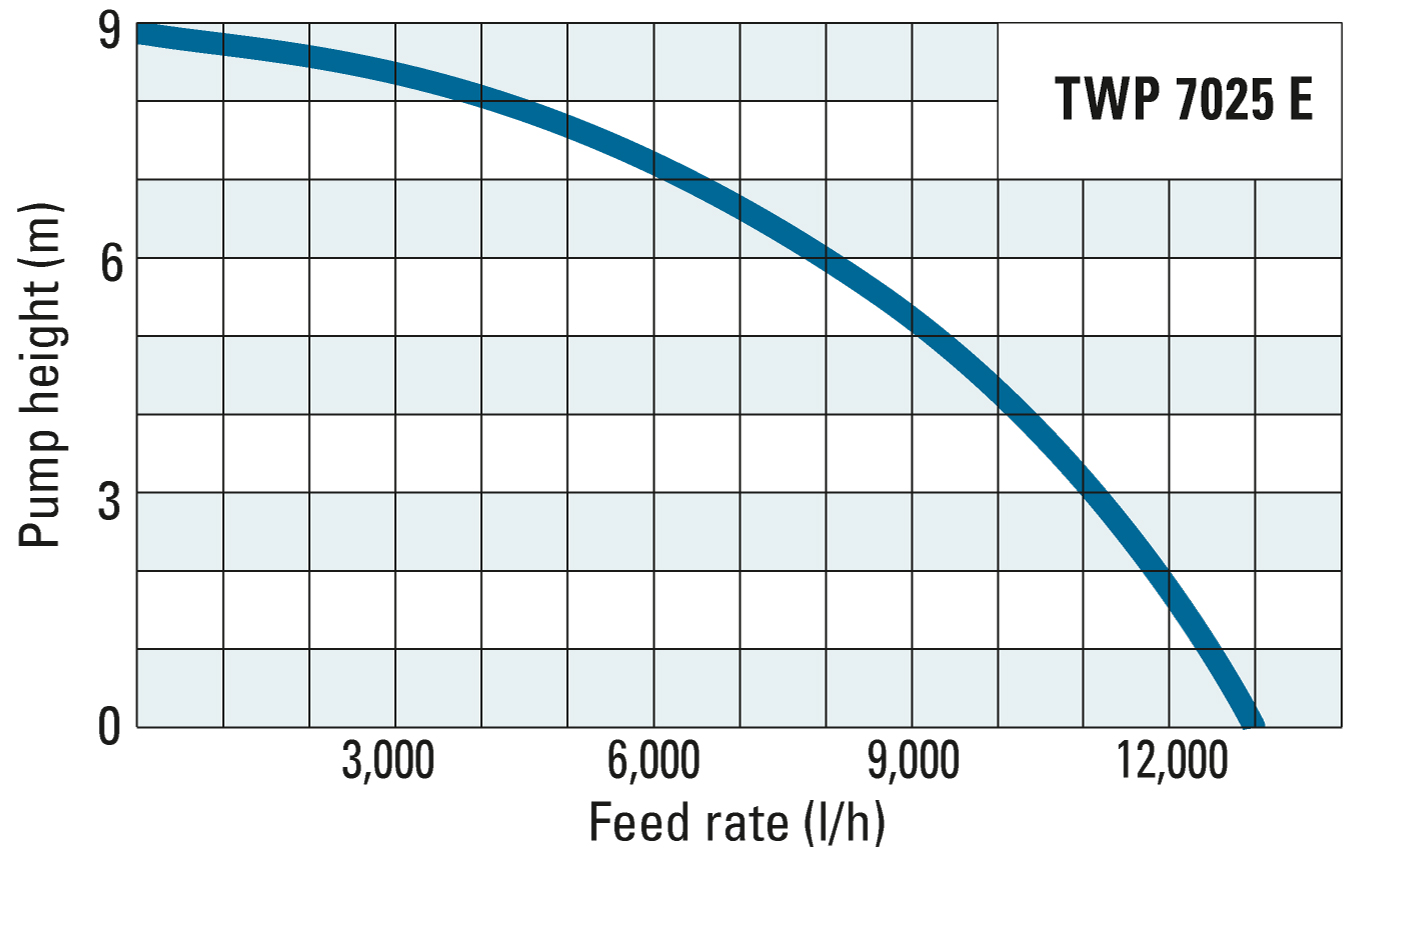 Pump height and feed rate of the TWP 7025 E